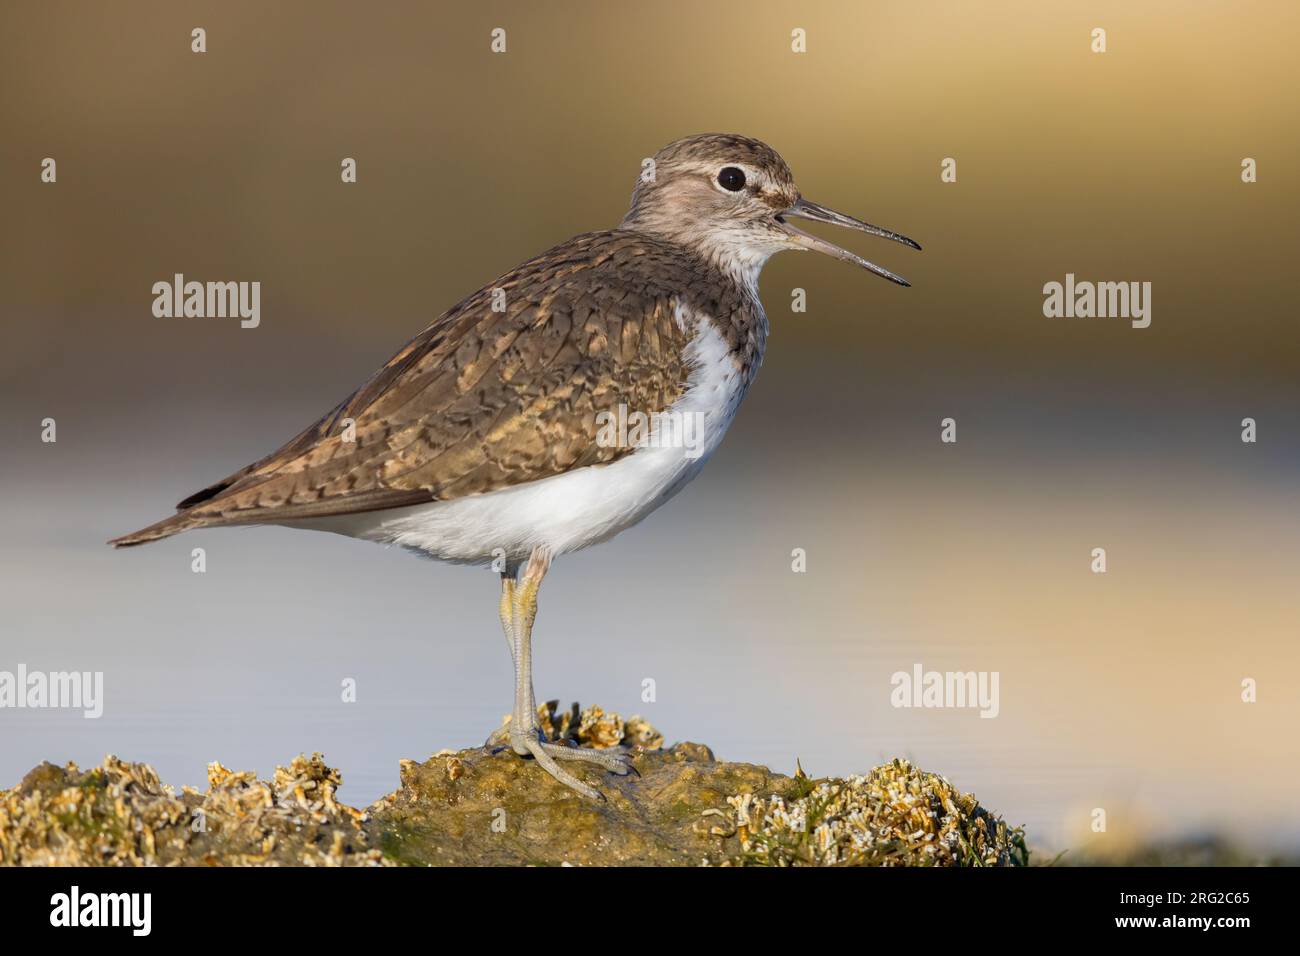 Common Sandpiper (Actitis hypoleucos), side view of an adult standing on a rock, Campania, Italy Stock Photo